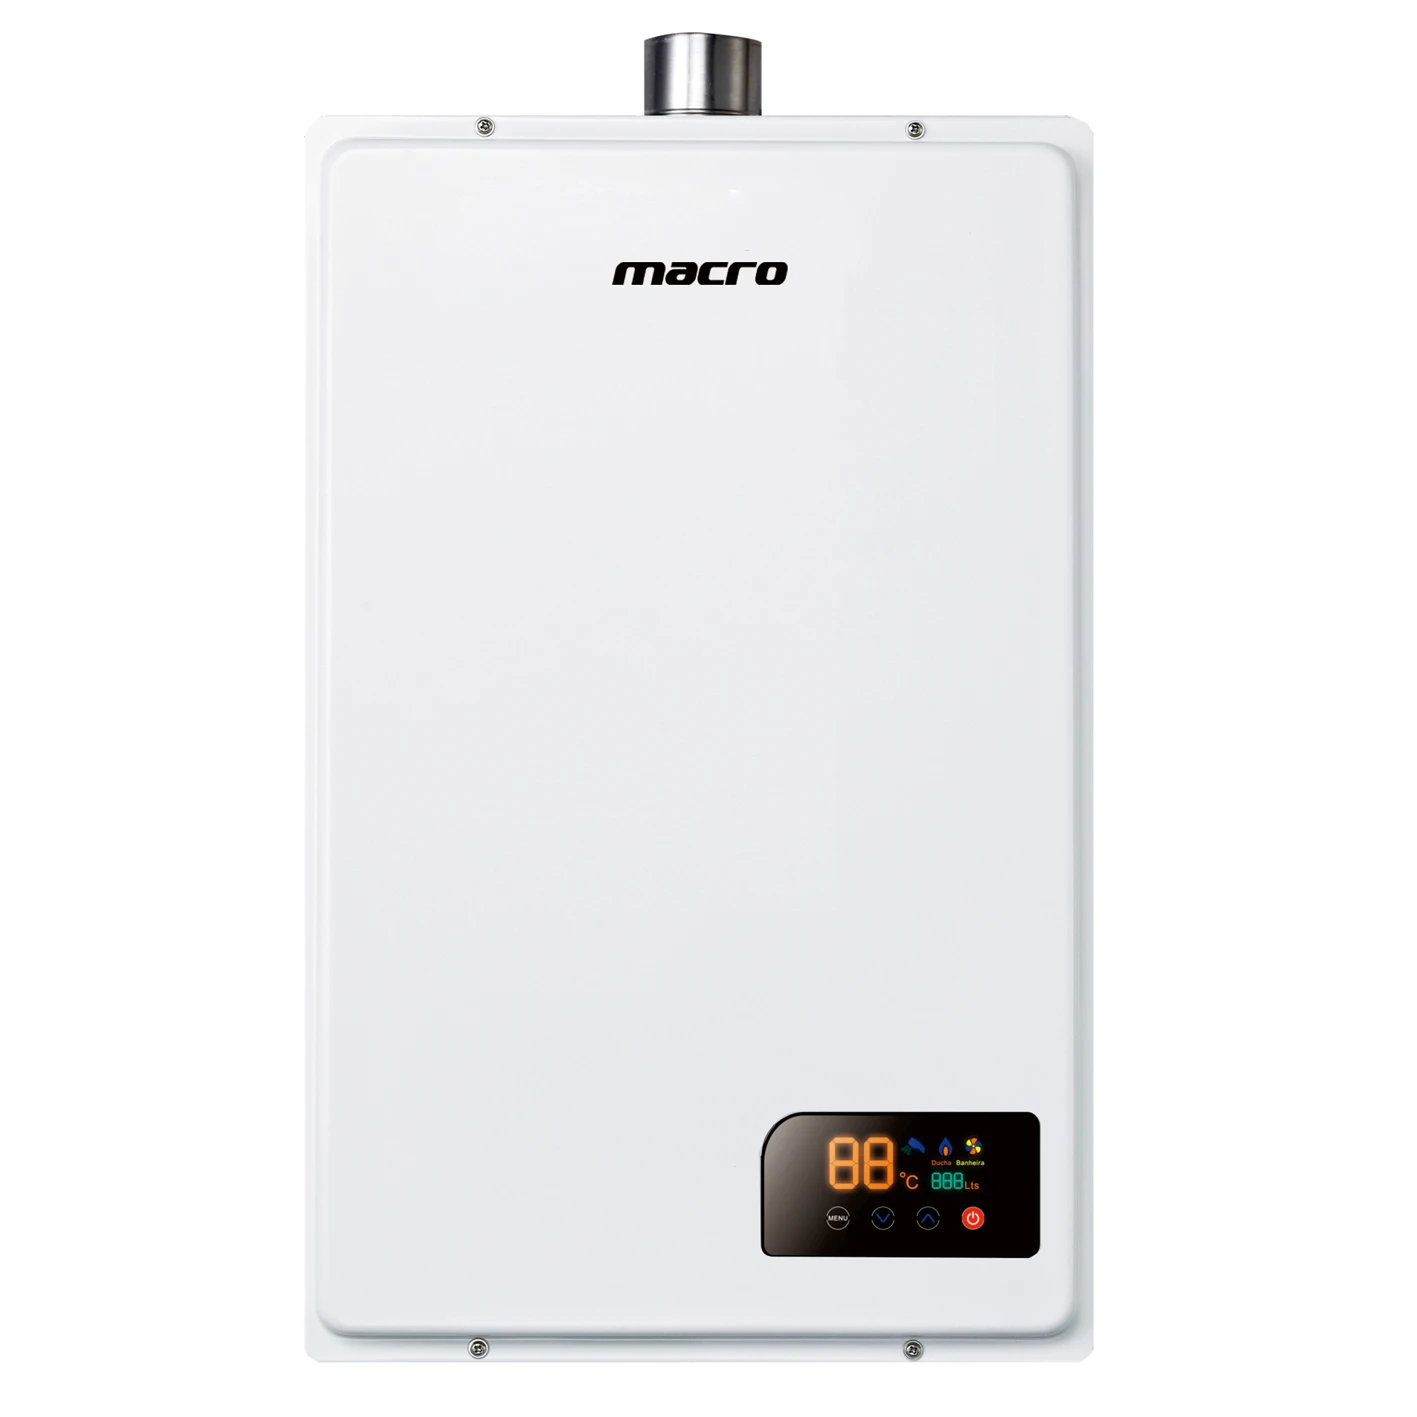 Smart Self-Adaption Constant Temperature Instant Gas Water Heater with LCD Error Display